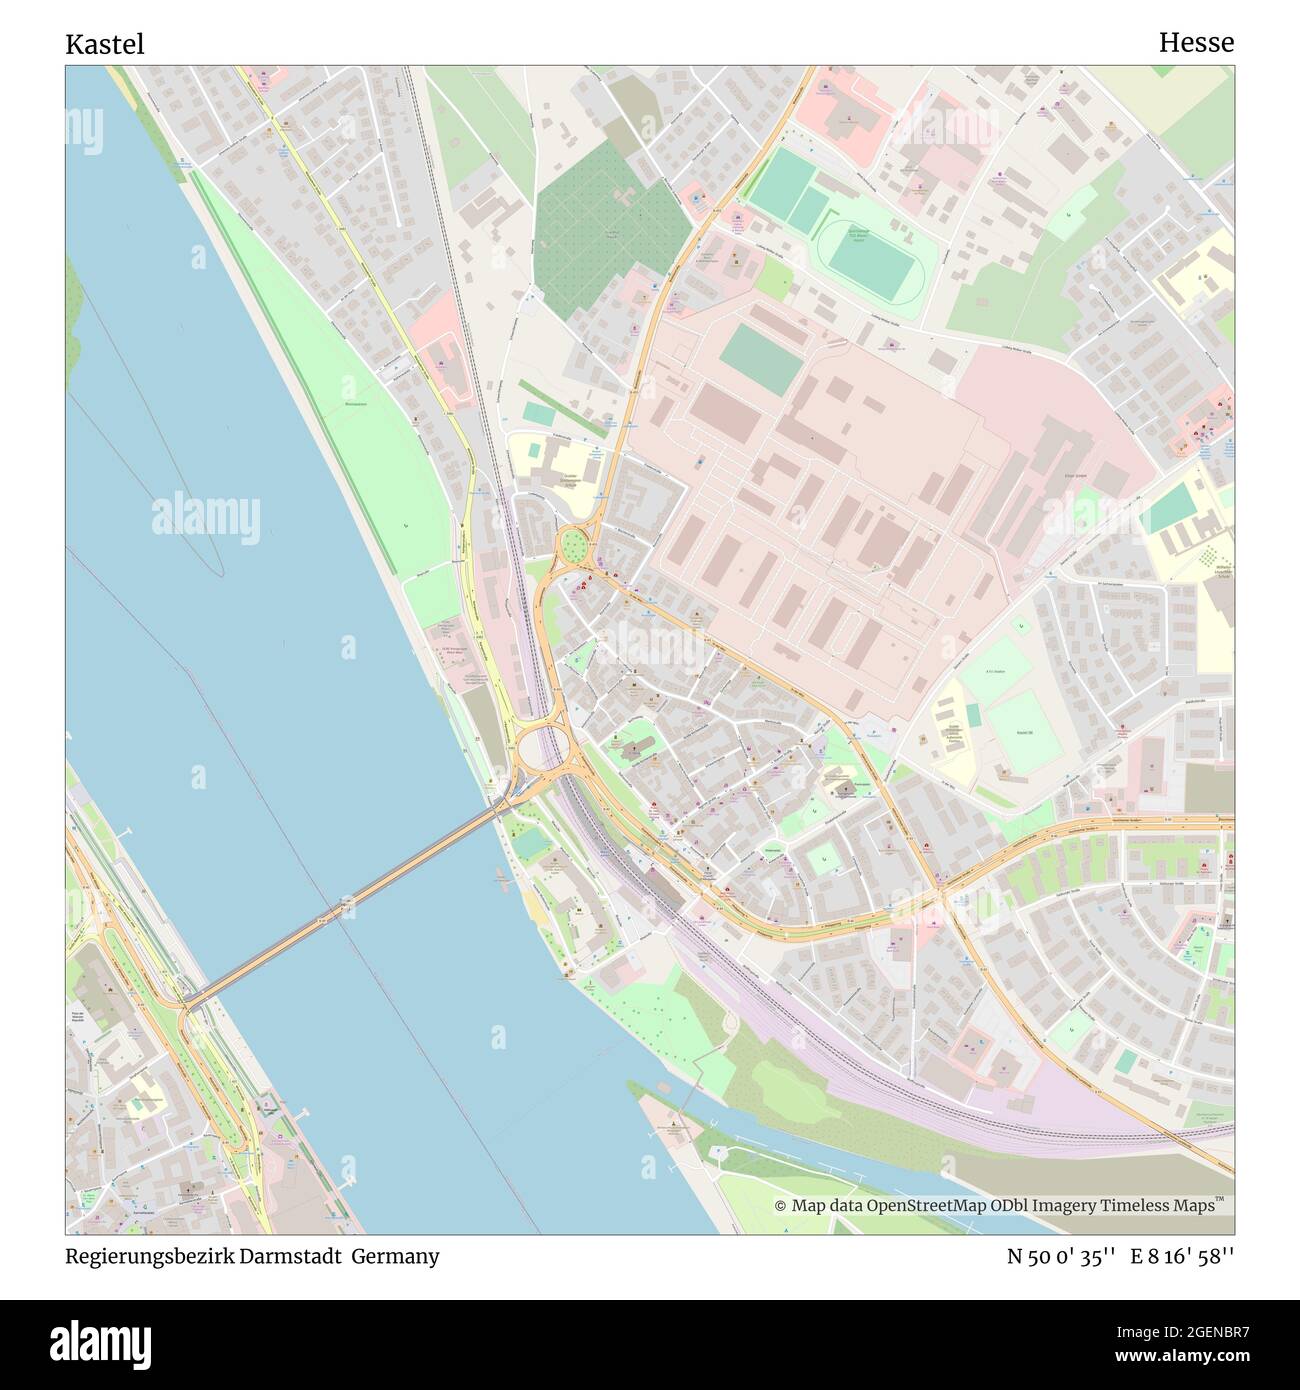 Kastel, Regierungsbezirk Darmstadt, Germany, Hesse, N 50 0' 35'', E 8 16' 58'', map, Timeless Map published in 2021. Travelers, explorers and adventurers like Florence Nightingale, David Livingstone, Ernest Shackleton, Lewis and Clark and Sherlock Holmes relied on maps to plan travels to the world's most remote corners, Timeless Maps is mapping most locations on the globe, showing the achievement of great dreams Stock Photo